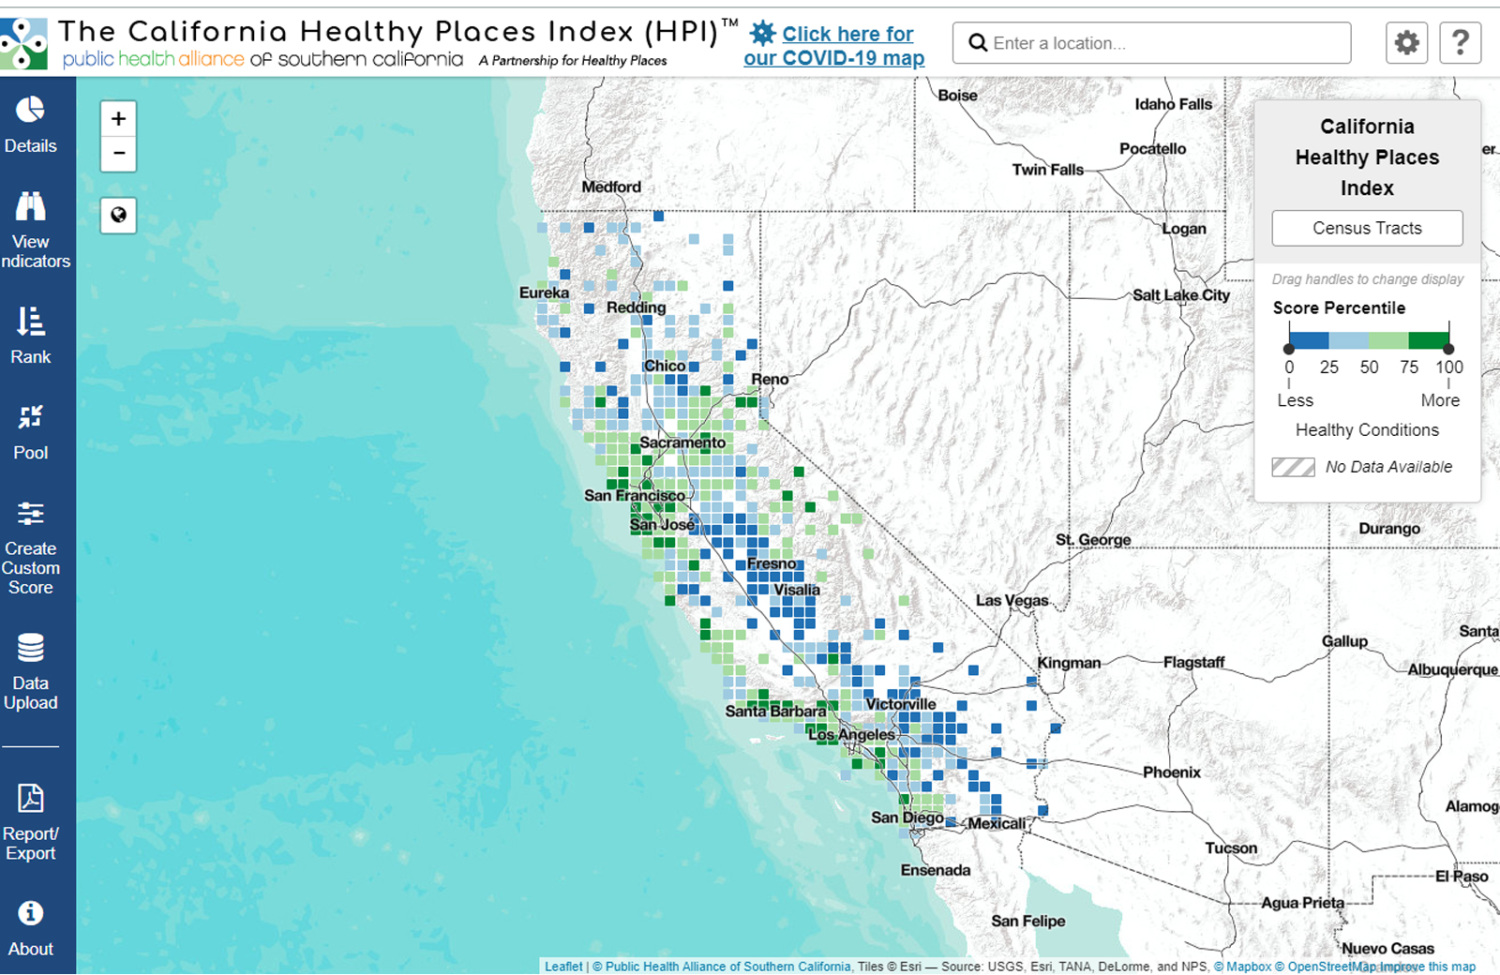 California Healthy Places Index tool